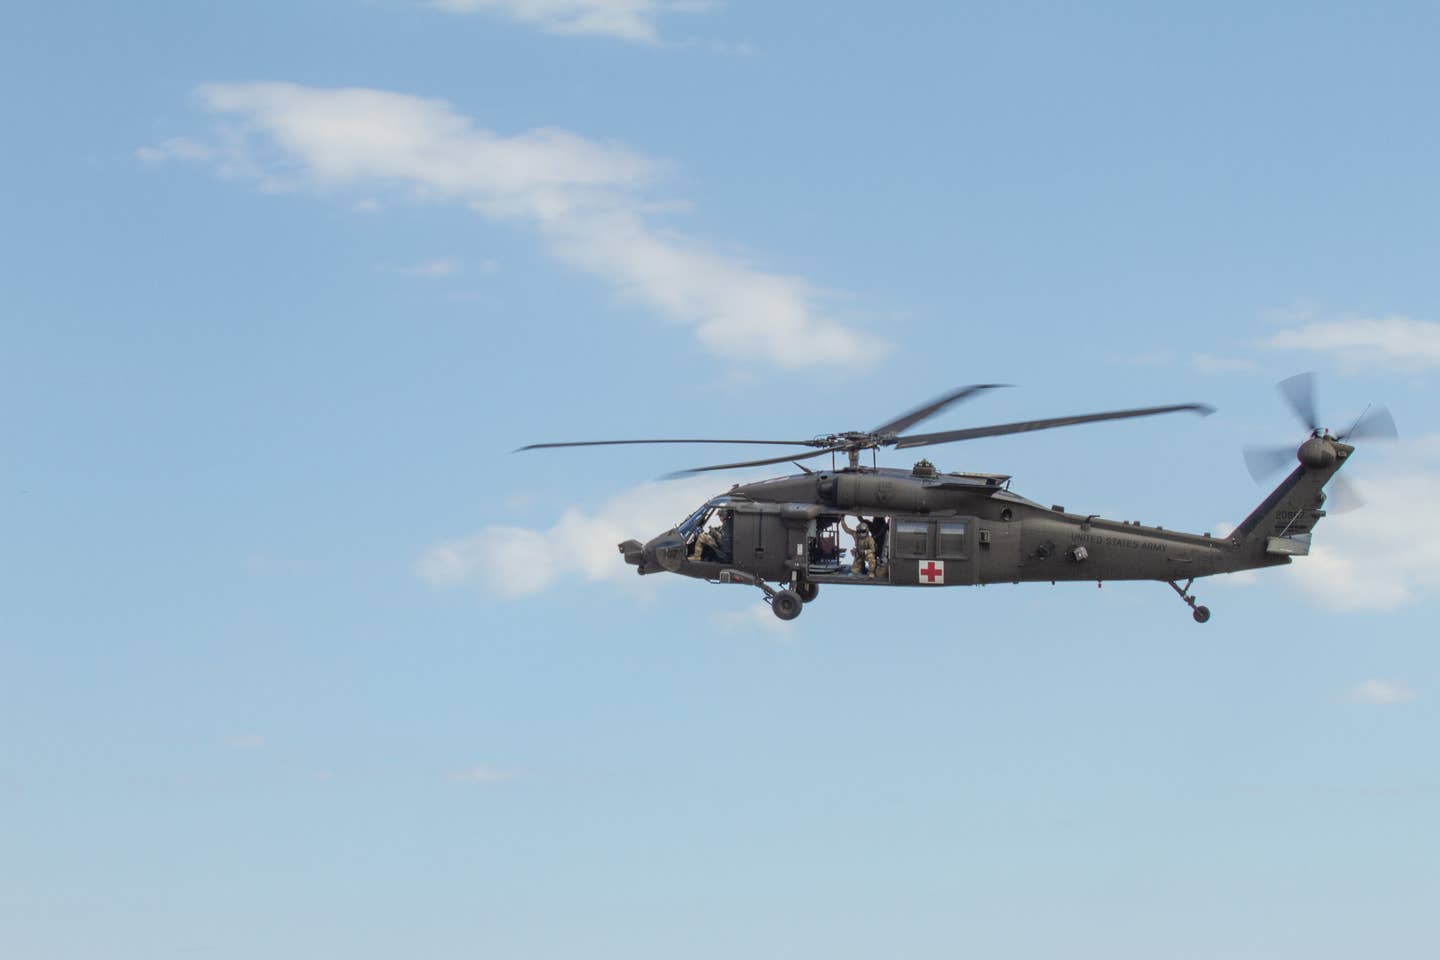 HH-60 Medevac helicopter with DVEPS